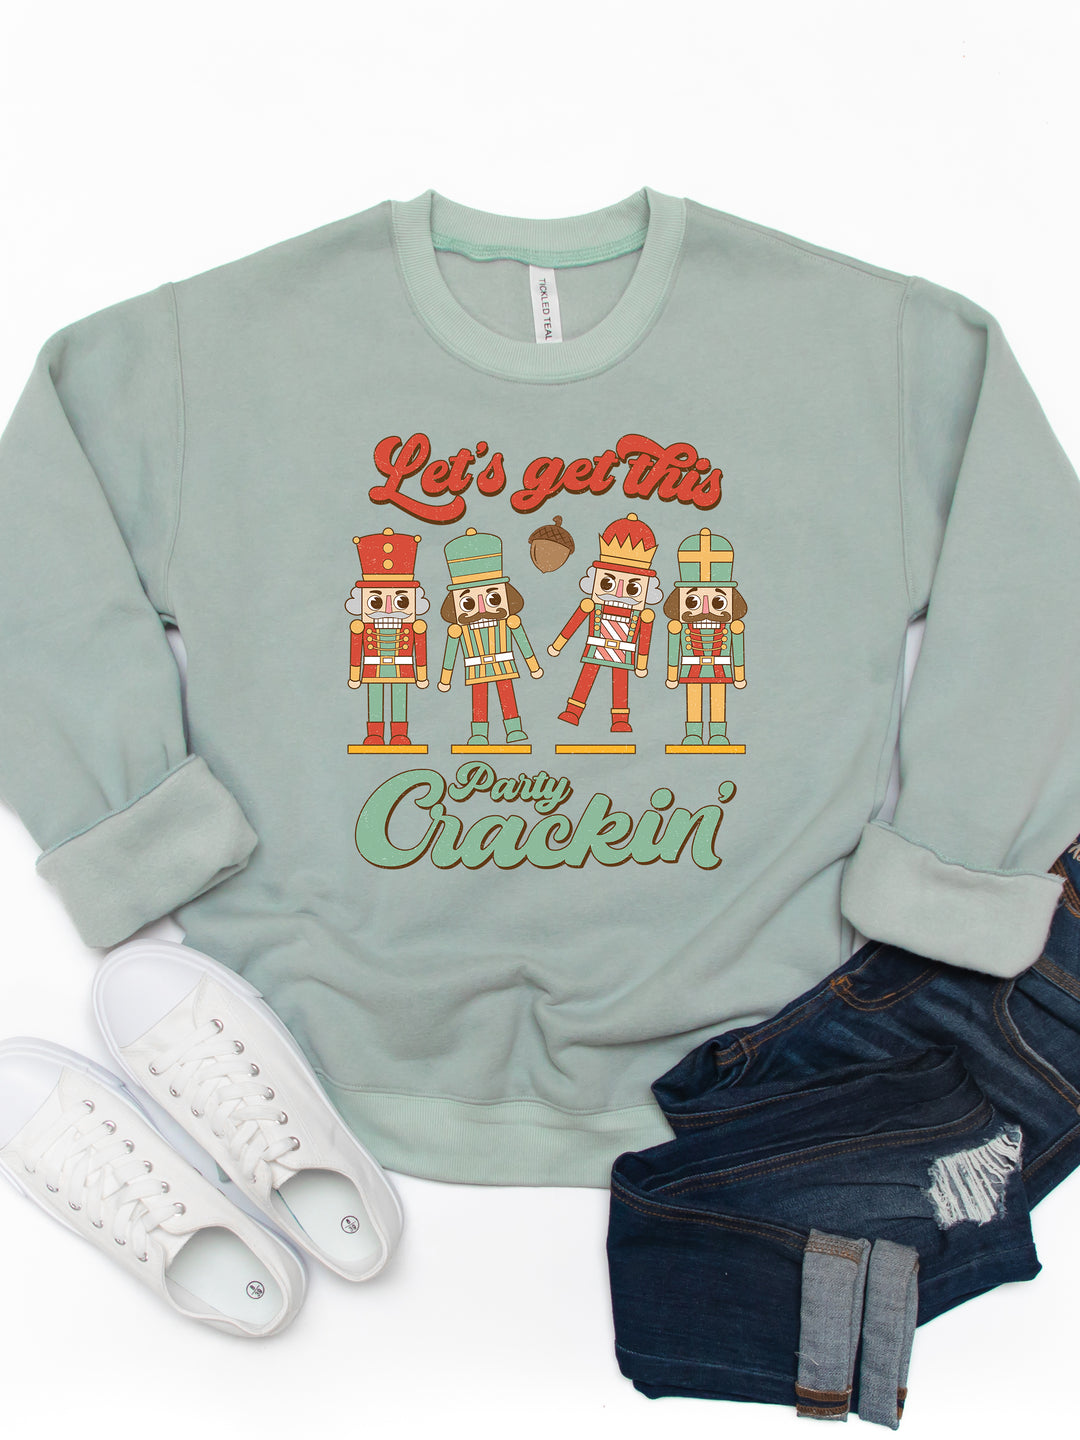 Let's Get This Party Crackin - Graphic Sweatshirt